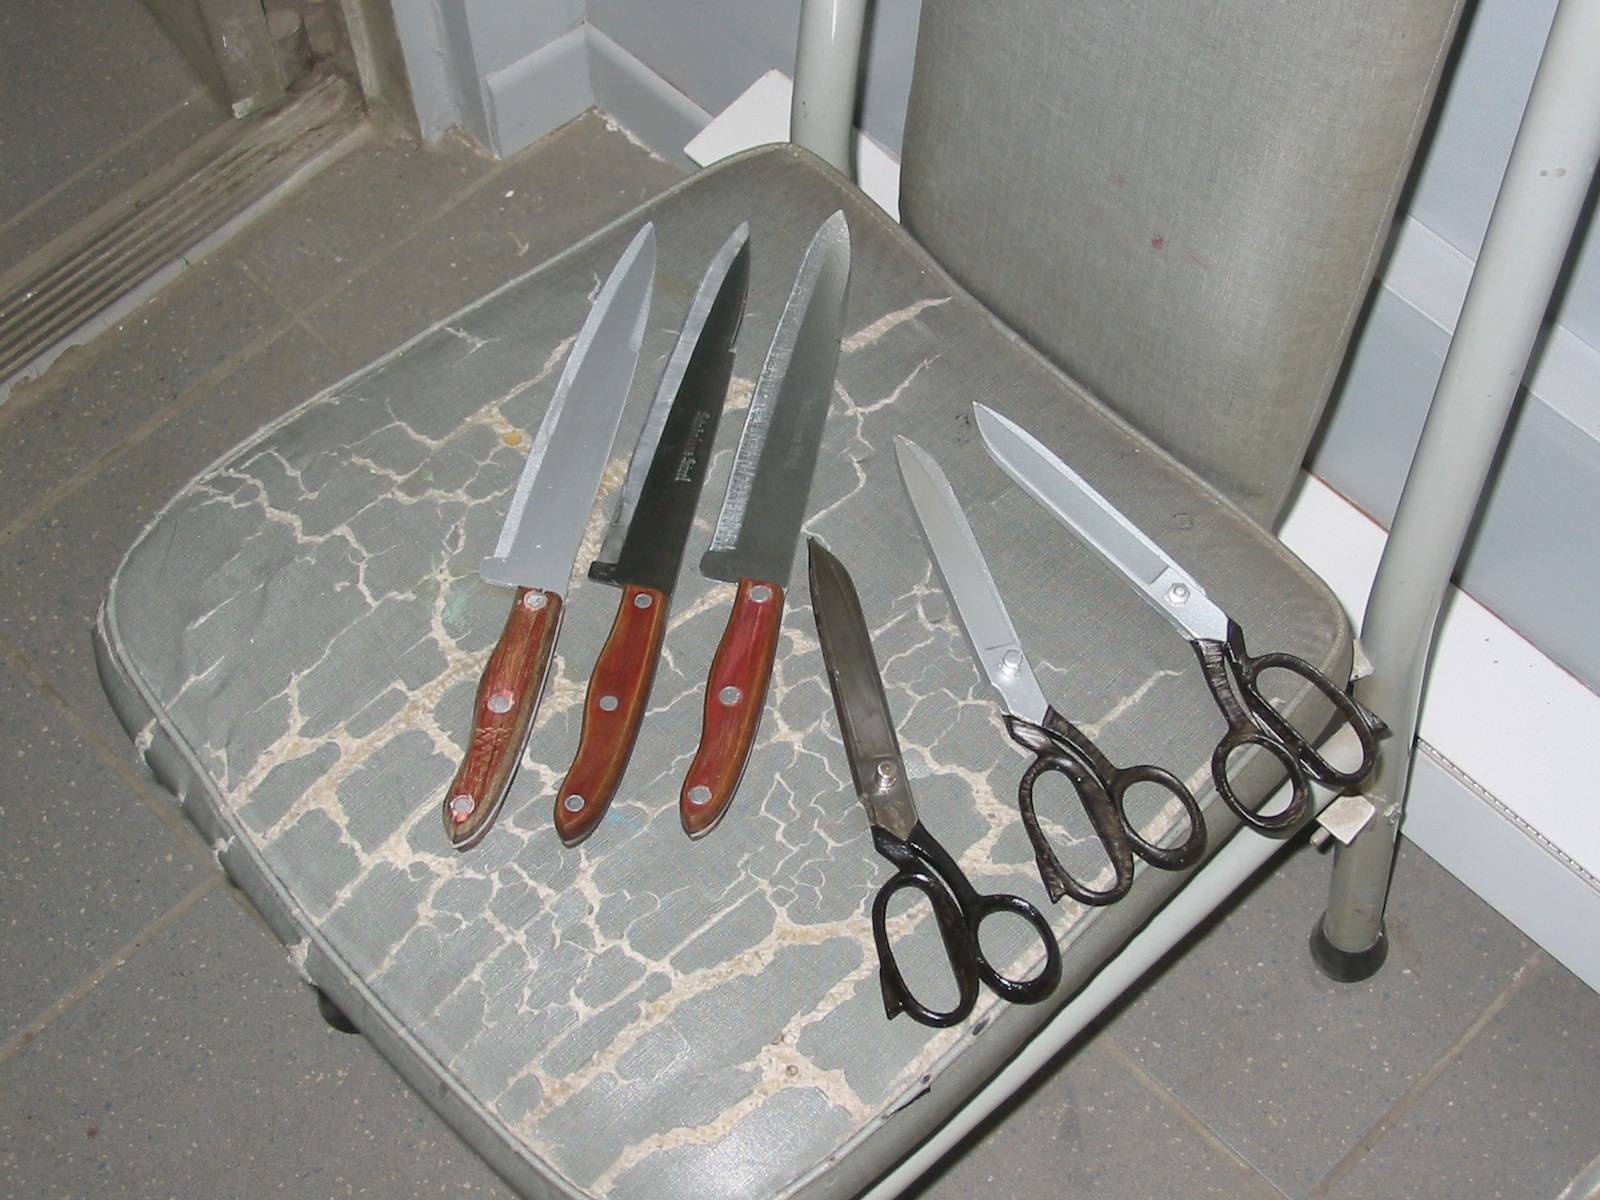 Fake / Safe knives and scissors -- stunt doubles